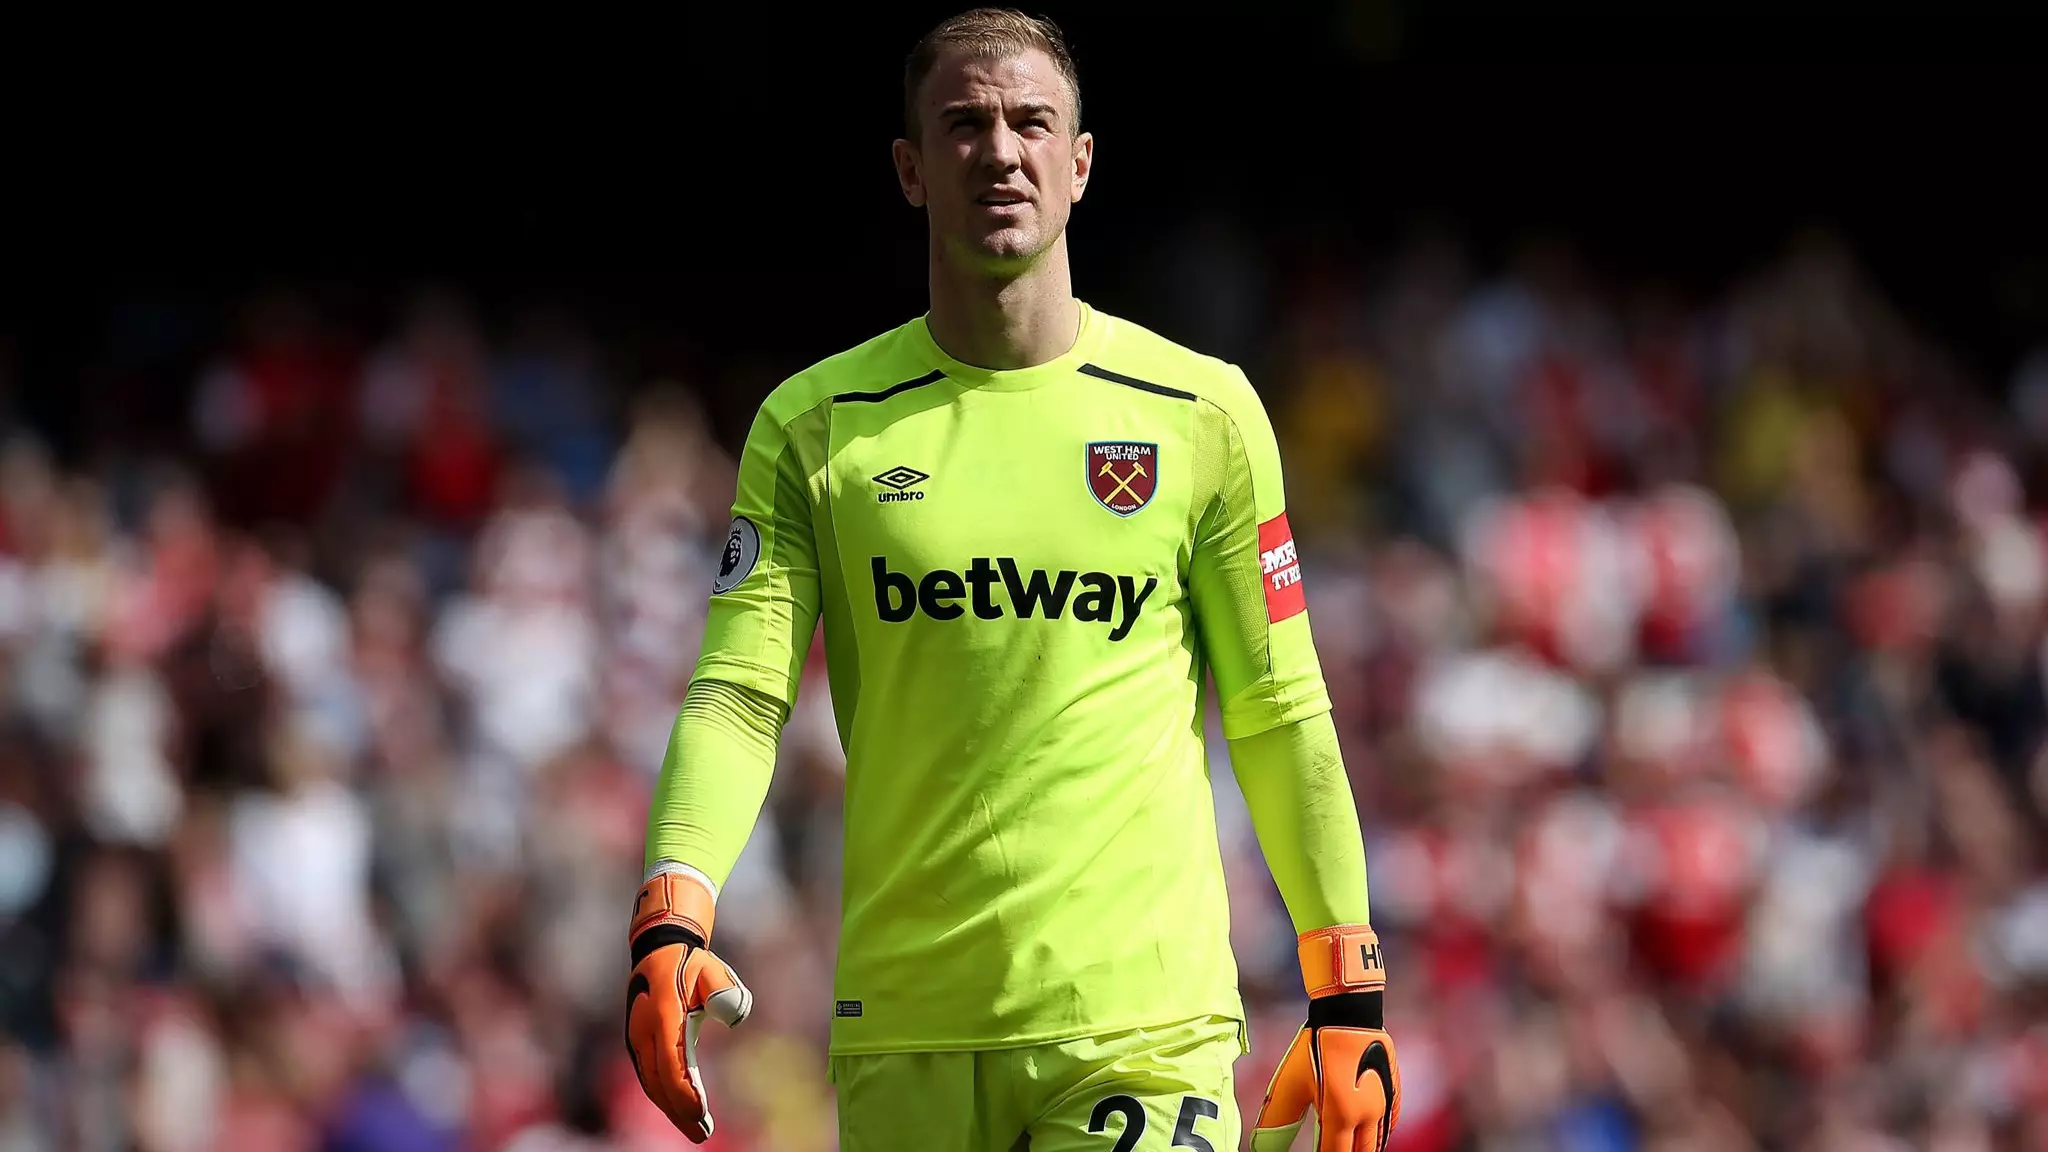 Joe Hart Subject To Offer To Revive His Career Abroad